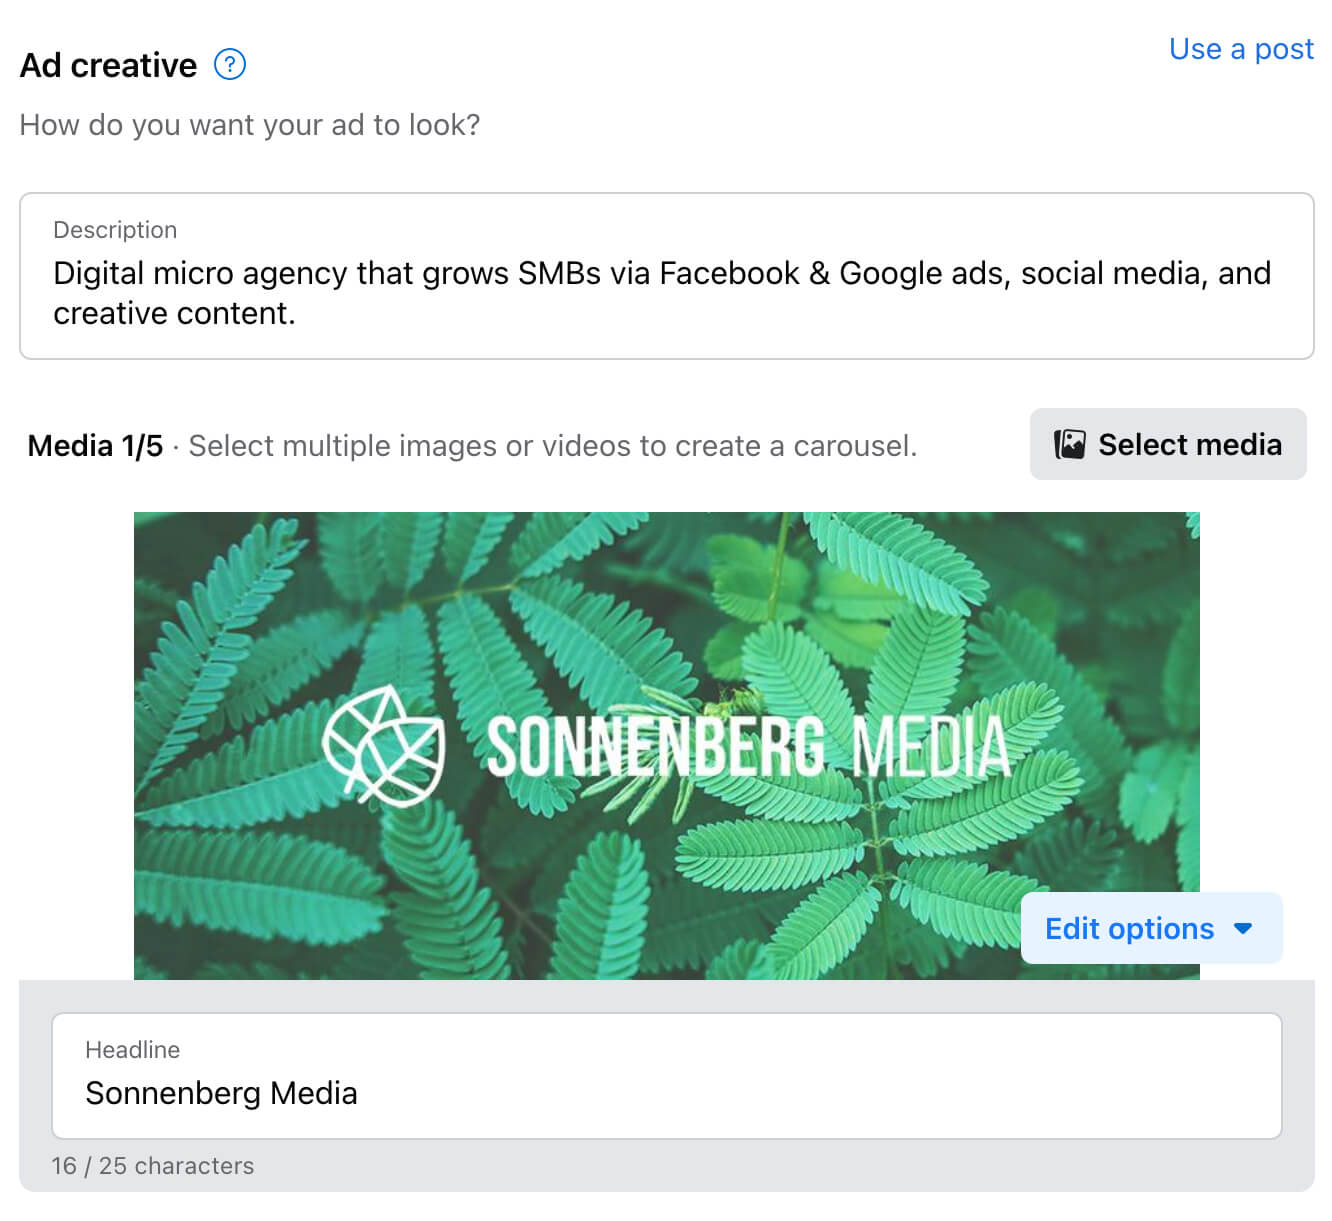 how-to-promote-your-sign-up-action-button-on-facebook-change-promotion-copy-or-creative-enter-caption-in-description-field-select-media-example-11